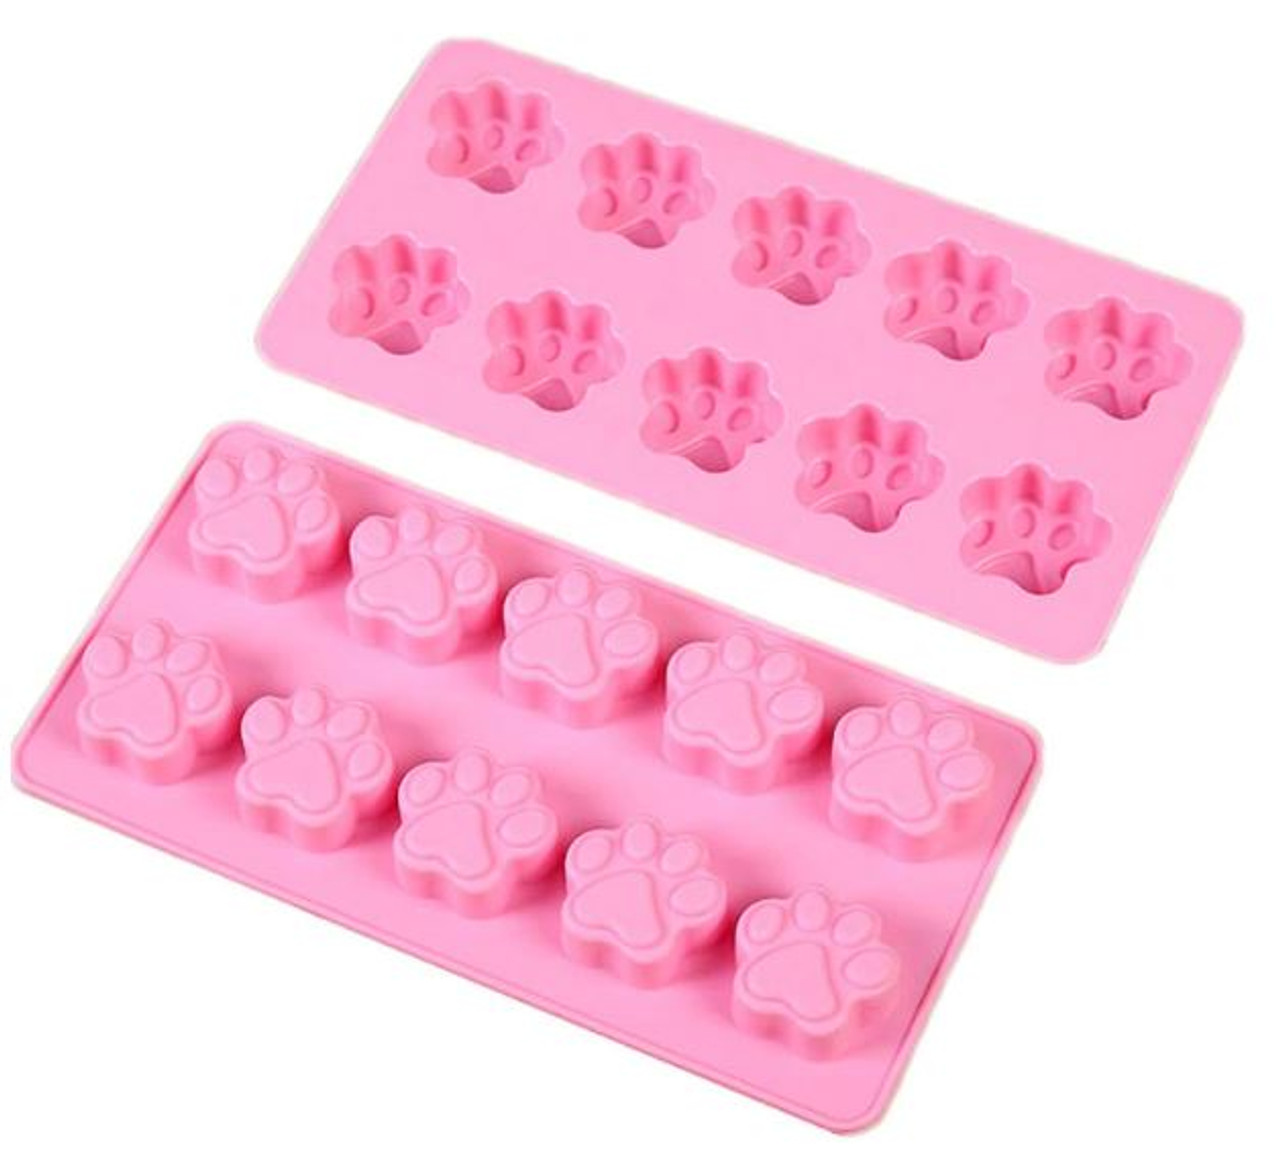 https://cdn11.bigcommerce.com/s-k5cfipcjjt/images/stencil/1280x1280/products/470/912/paw_print_ice_tray_mold__83212.1537236995.jpg?c=2